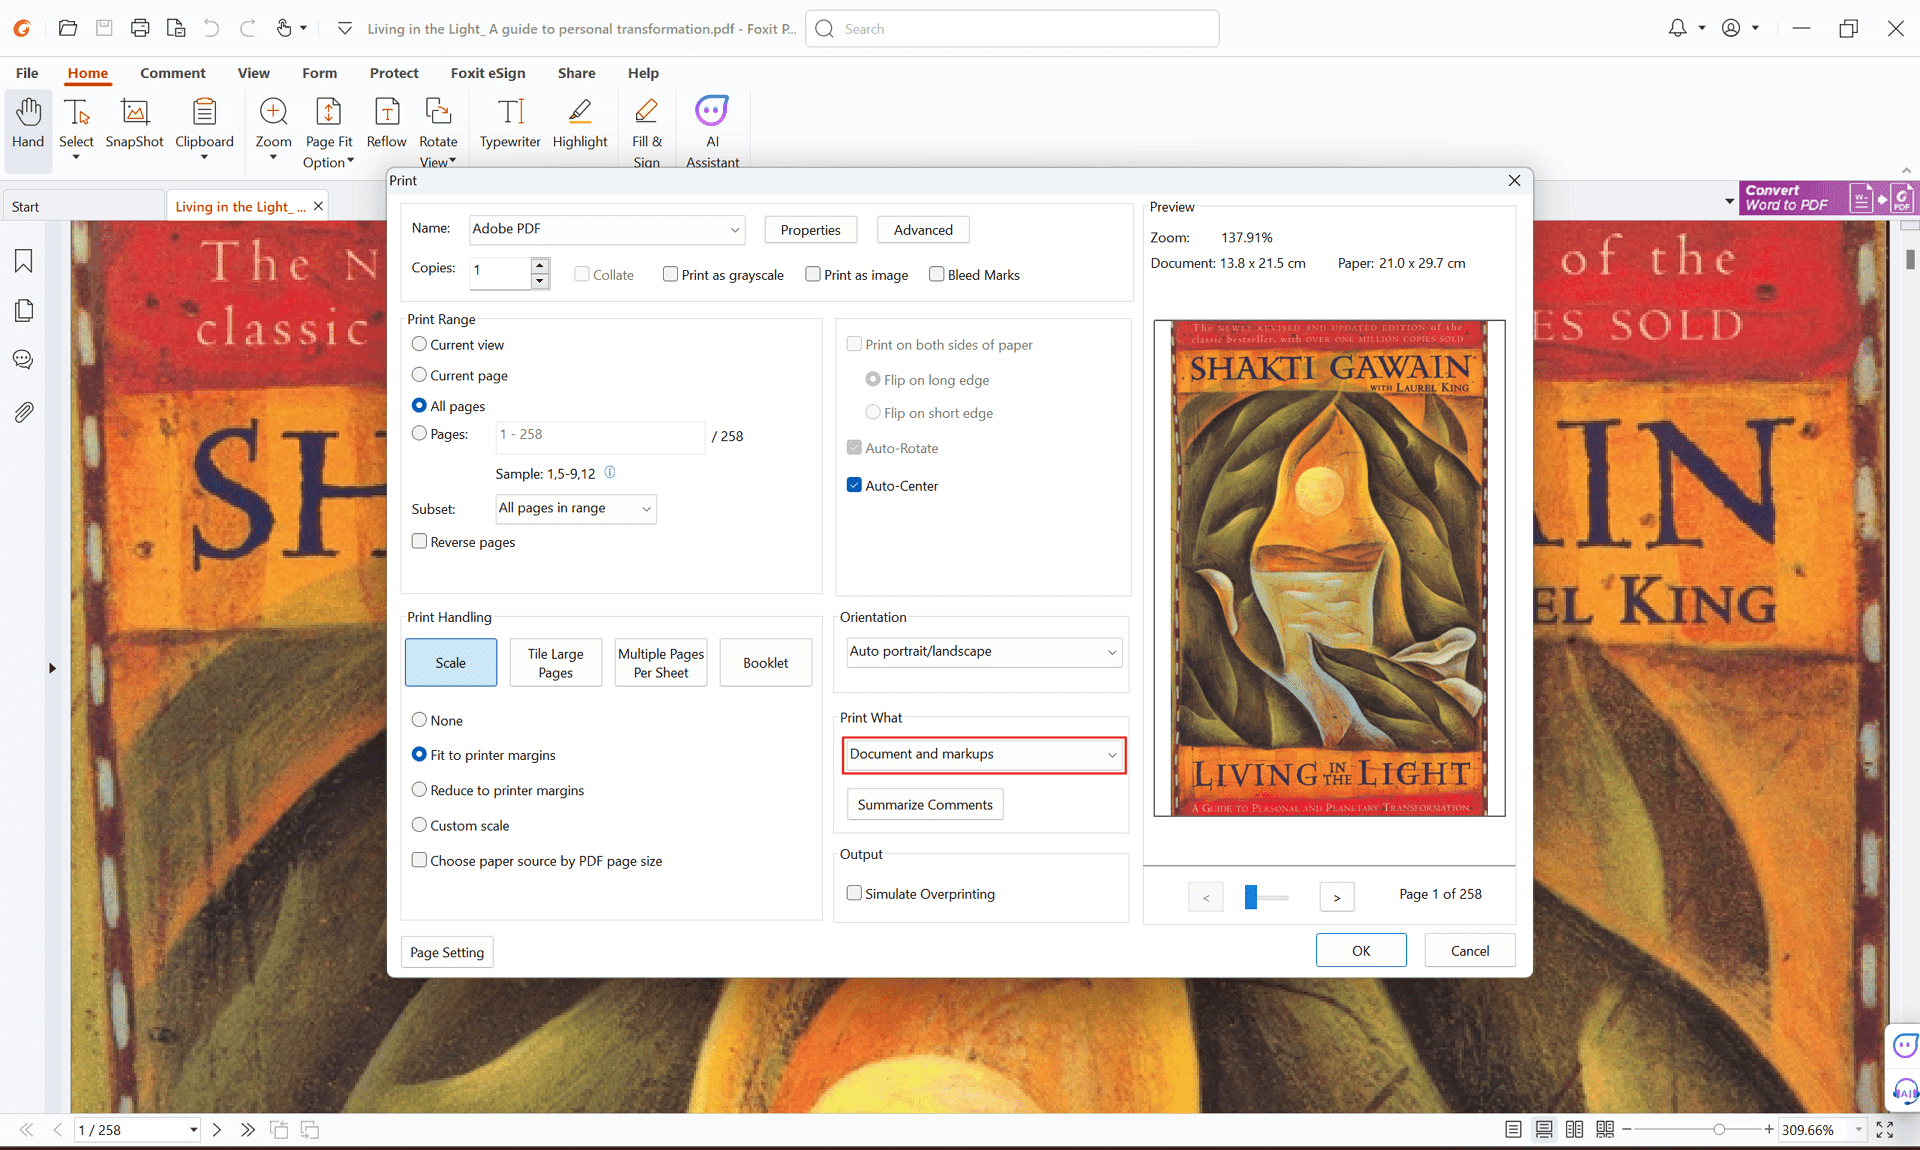 In the Print window, under the Print What section, select "Document and markups" from the dropdown menu.